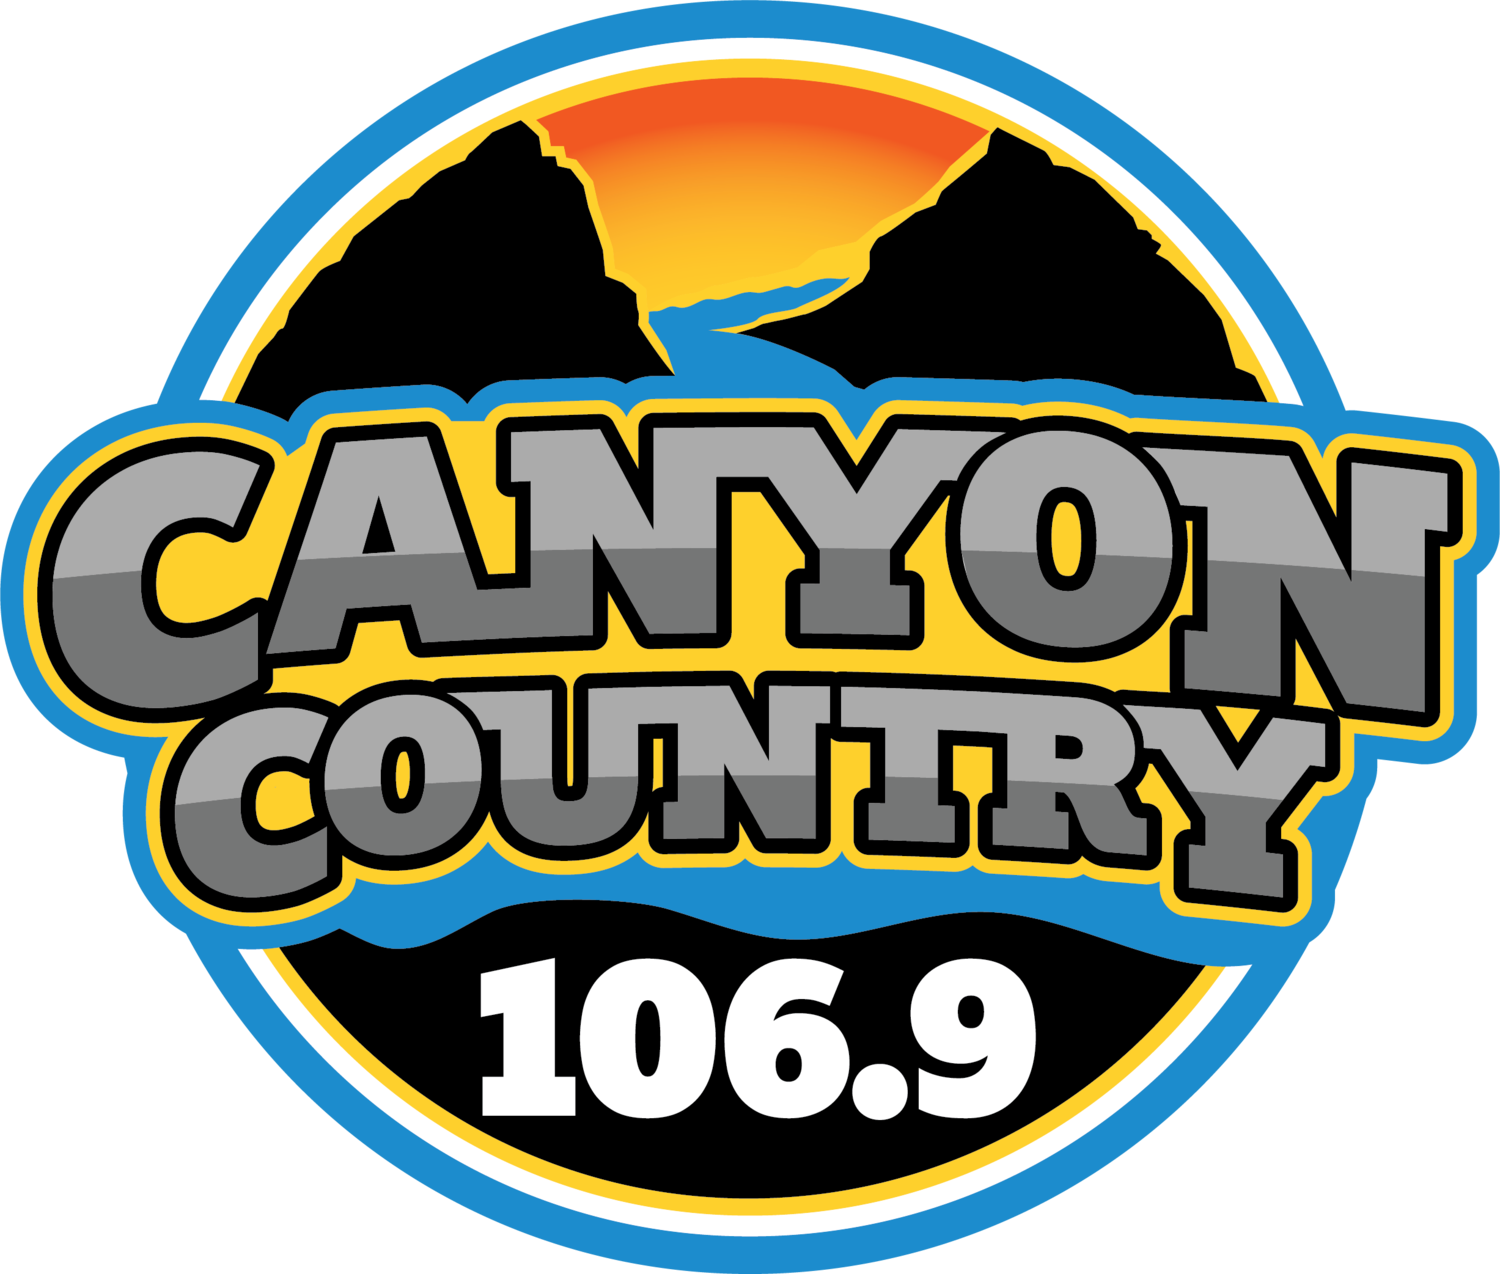 Canyon Country 106.9